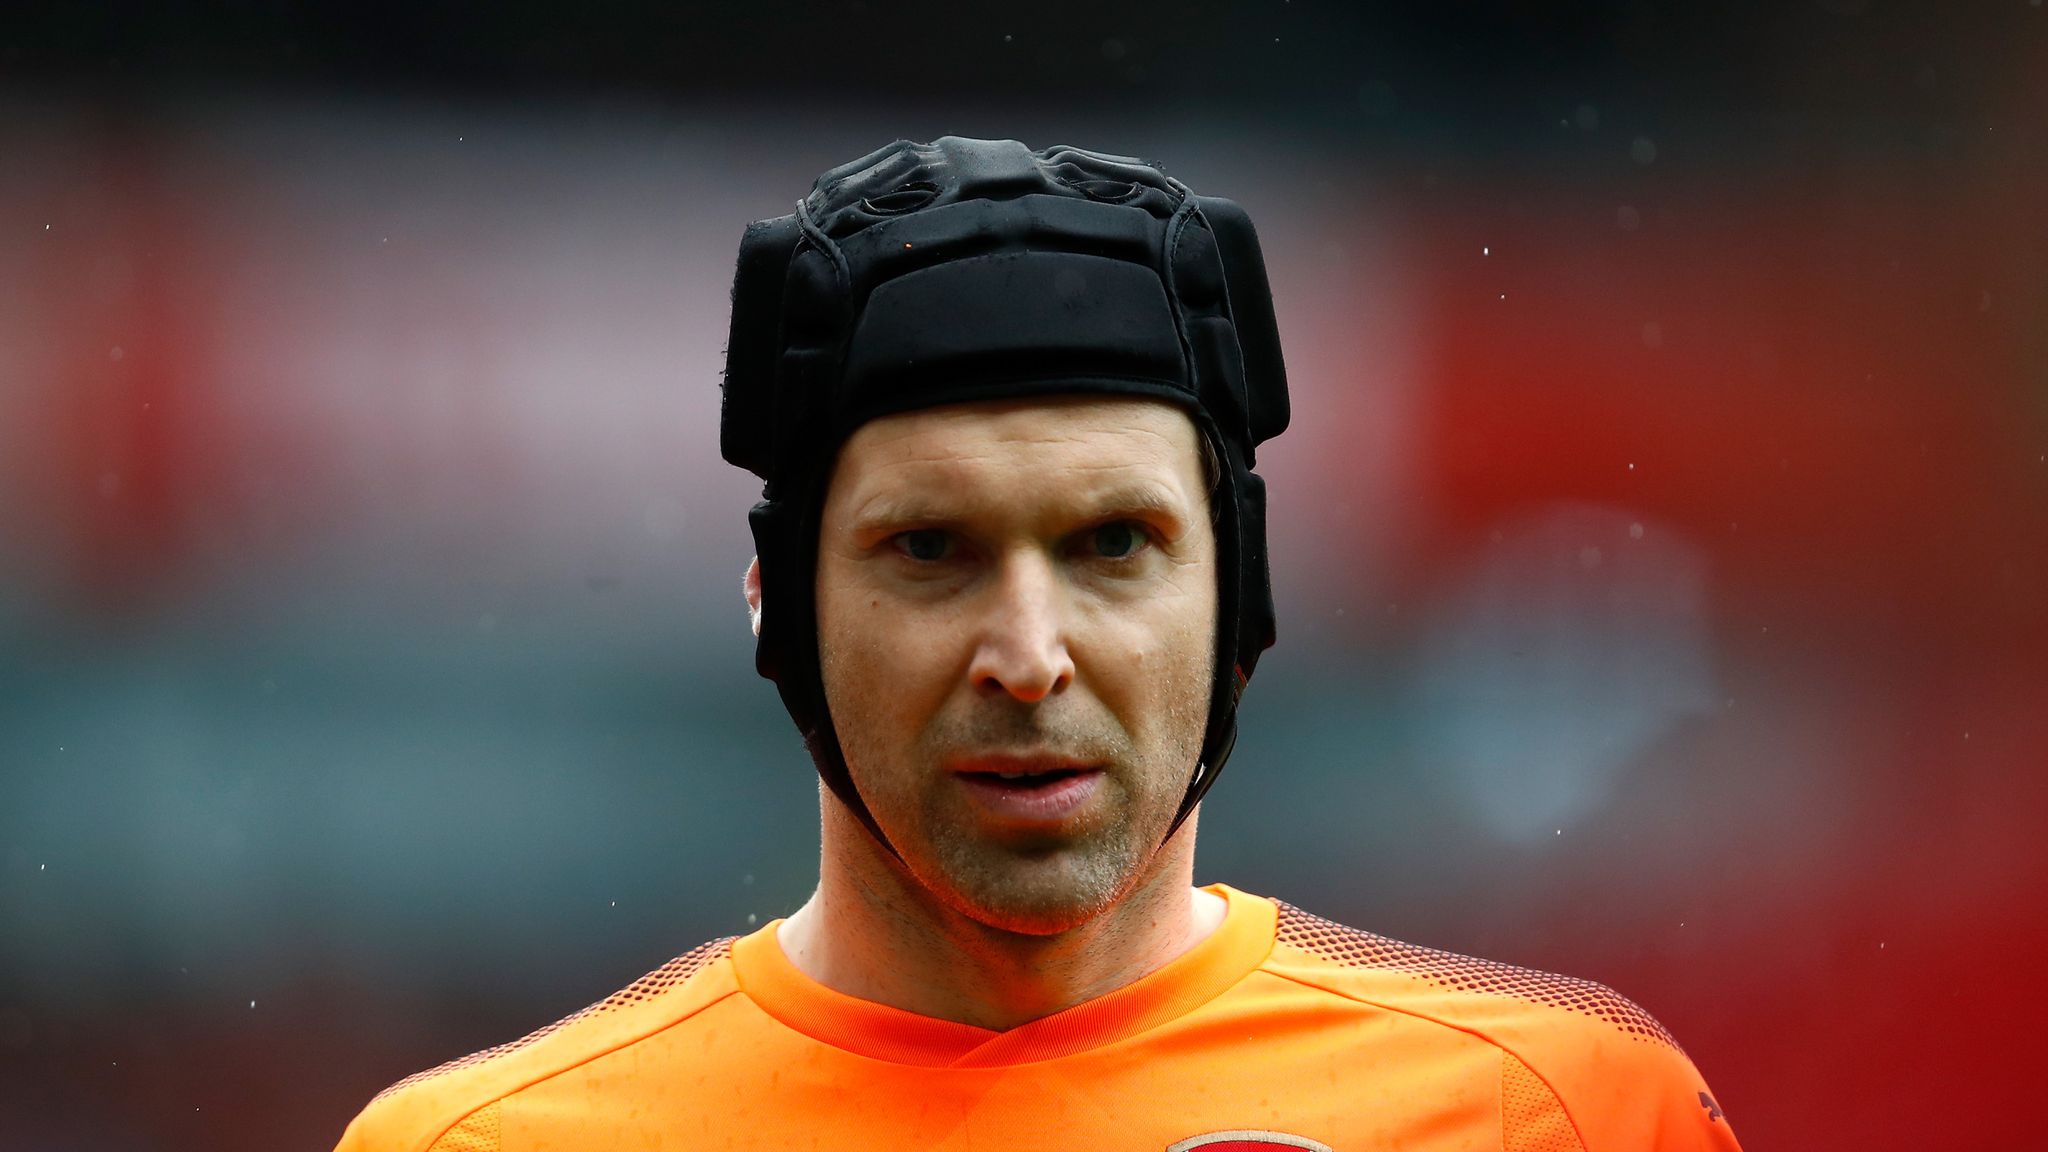 Chelsea legend Petr Cech eyes an ICE HOCKEY title with the